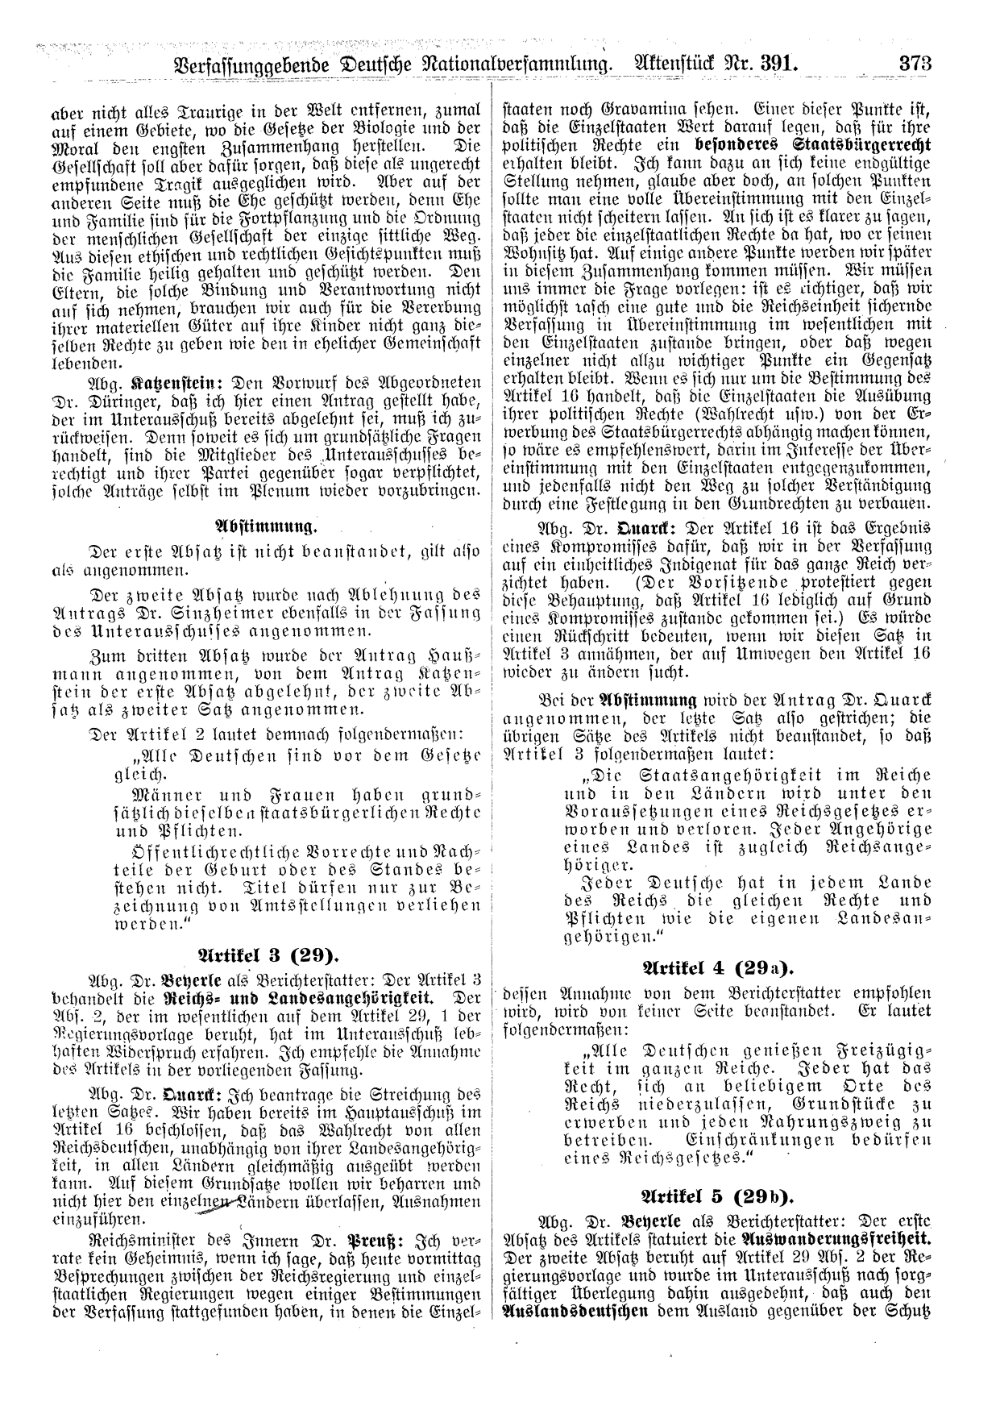 Scan of page 373